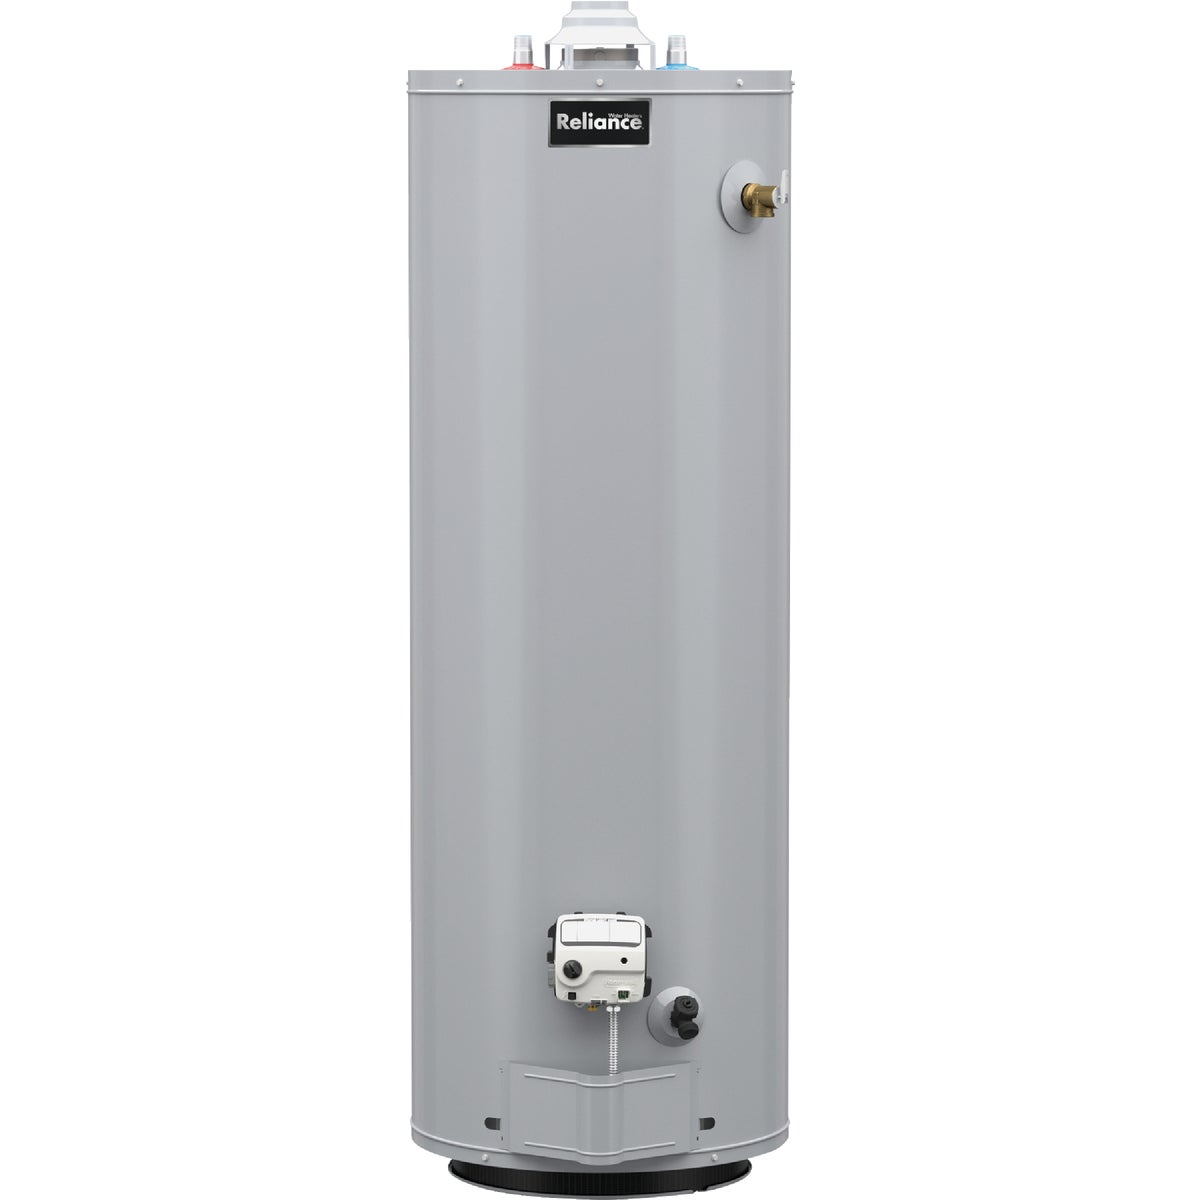 Item 401893, Natural gas water heater with insulation blanket.